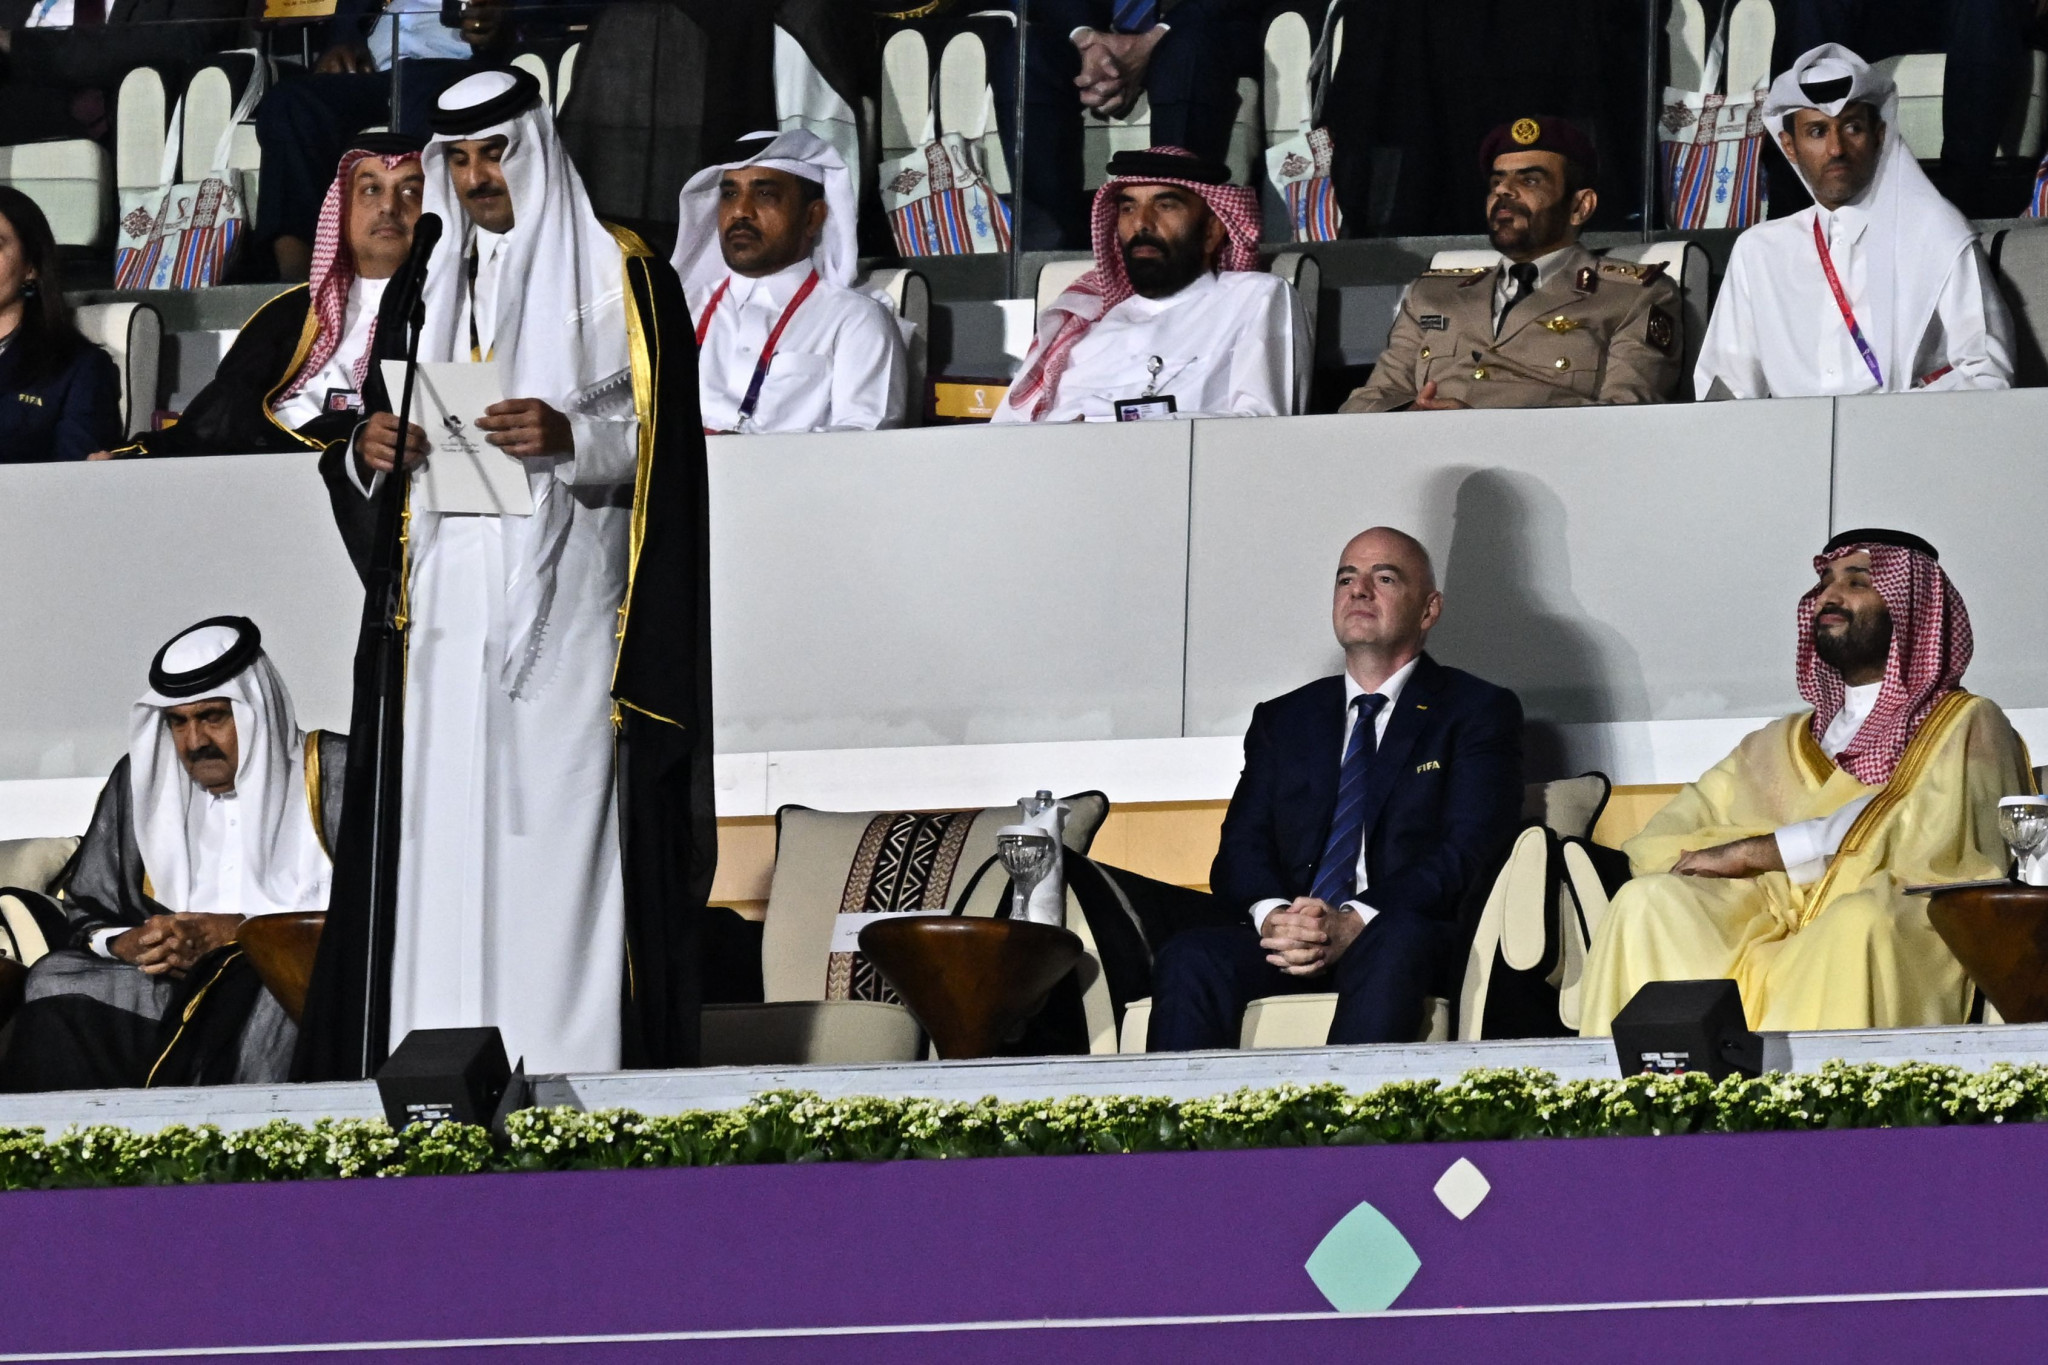 FIFA President Gianni Infantino, second left front, appears to enjoy a friendly relationship with Saudi Crown Prince Mohammed bin Salman, furthest left front ©Getty Images